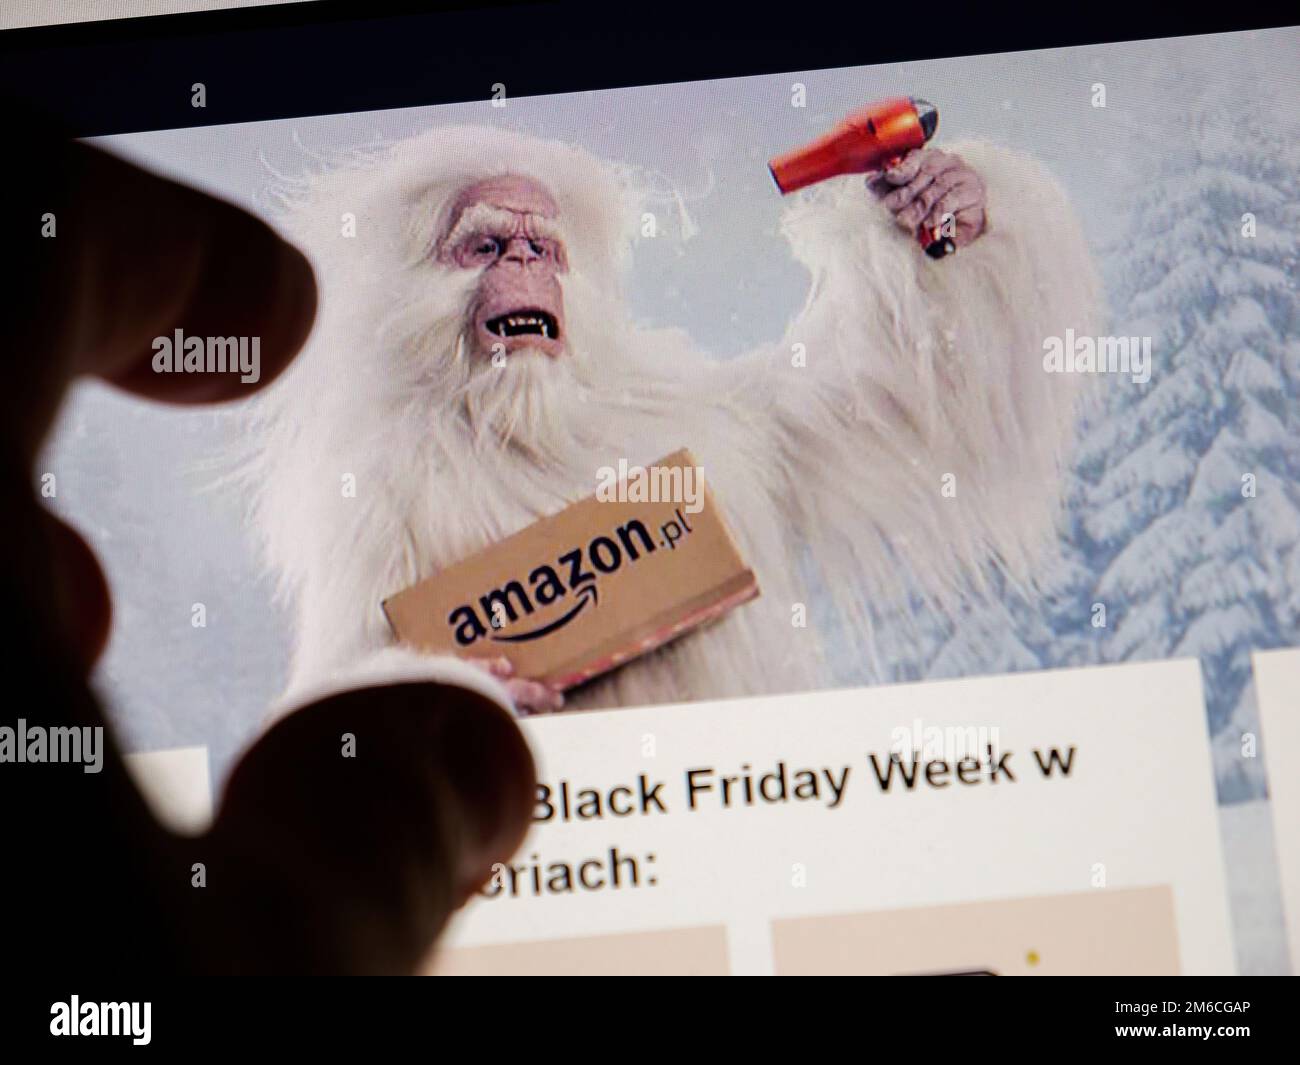 Paris, France - Nov 28, 2022: Male hand over the display of a computer - Amazon Prime Polska Polish website Black Friday is ending at midnight on the Amazon website of the online e-commerce giant Stock Photo